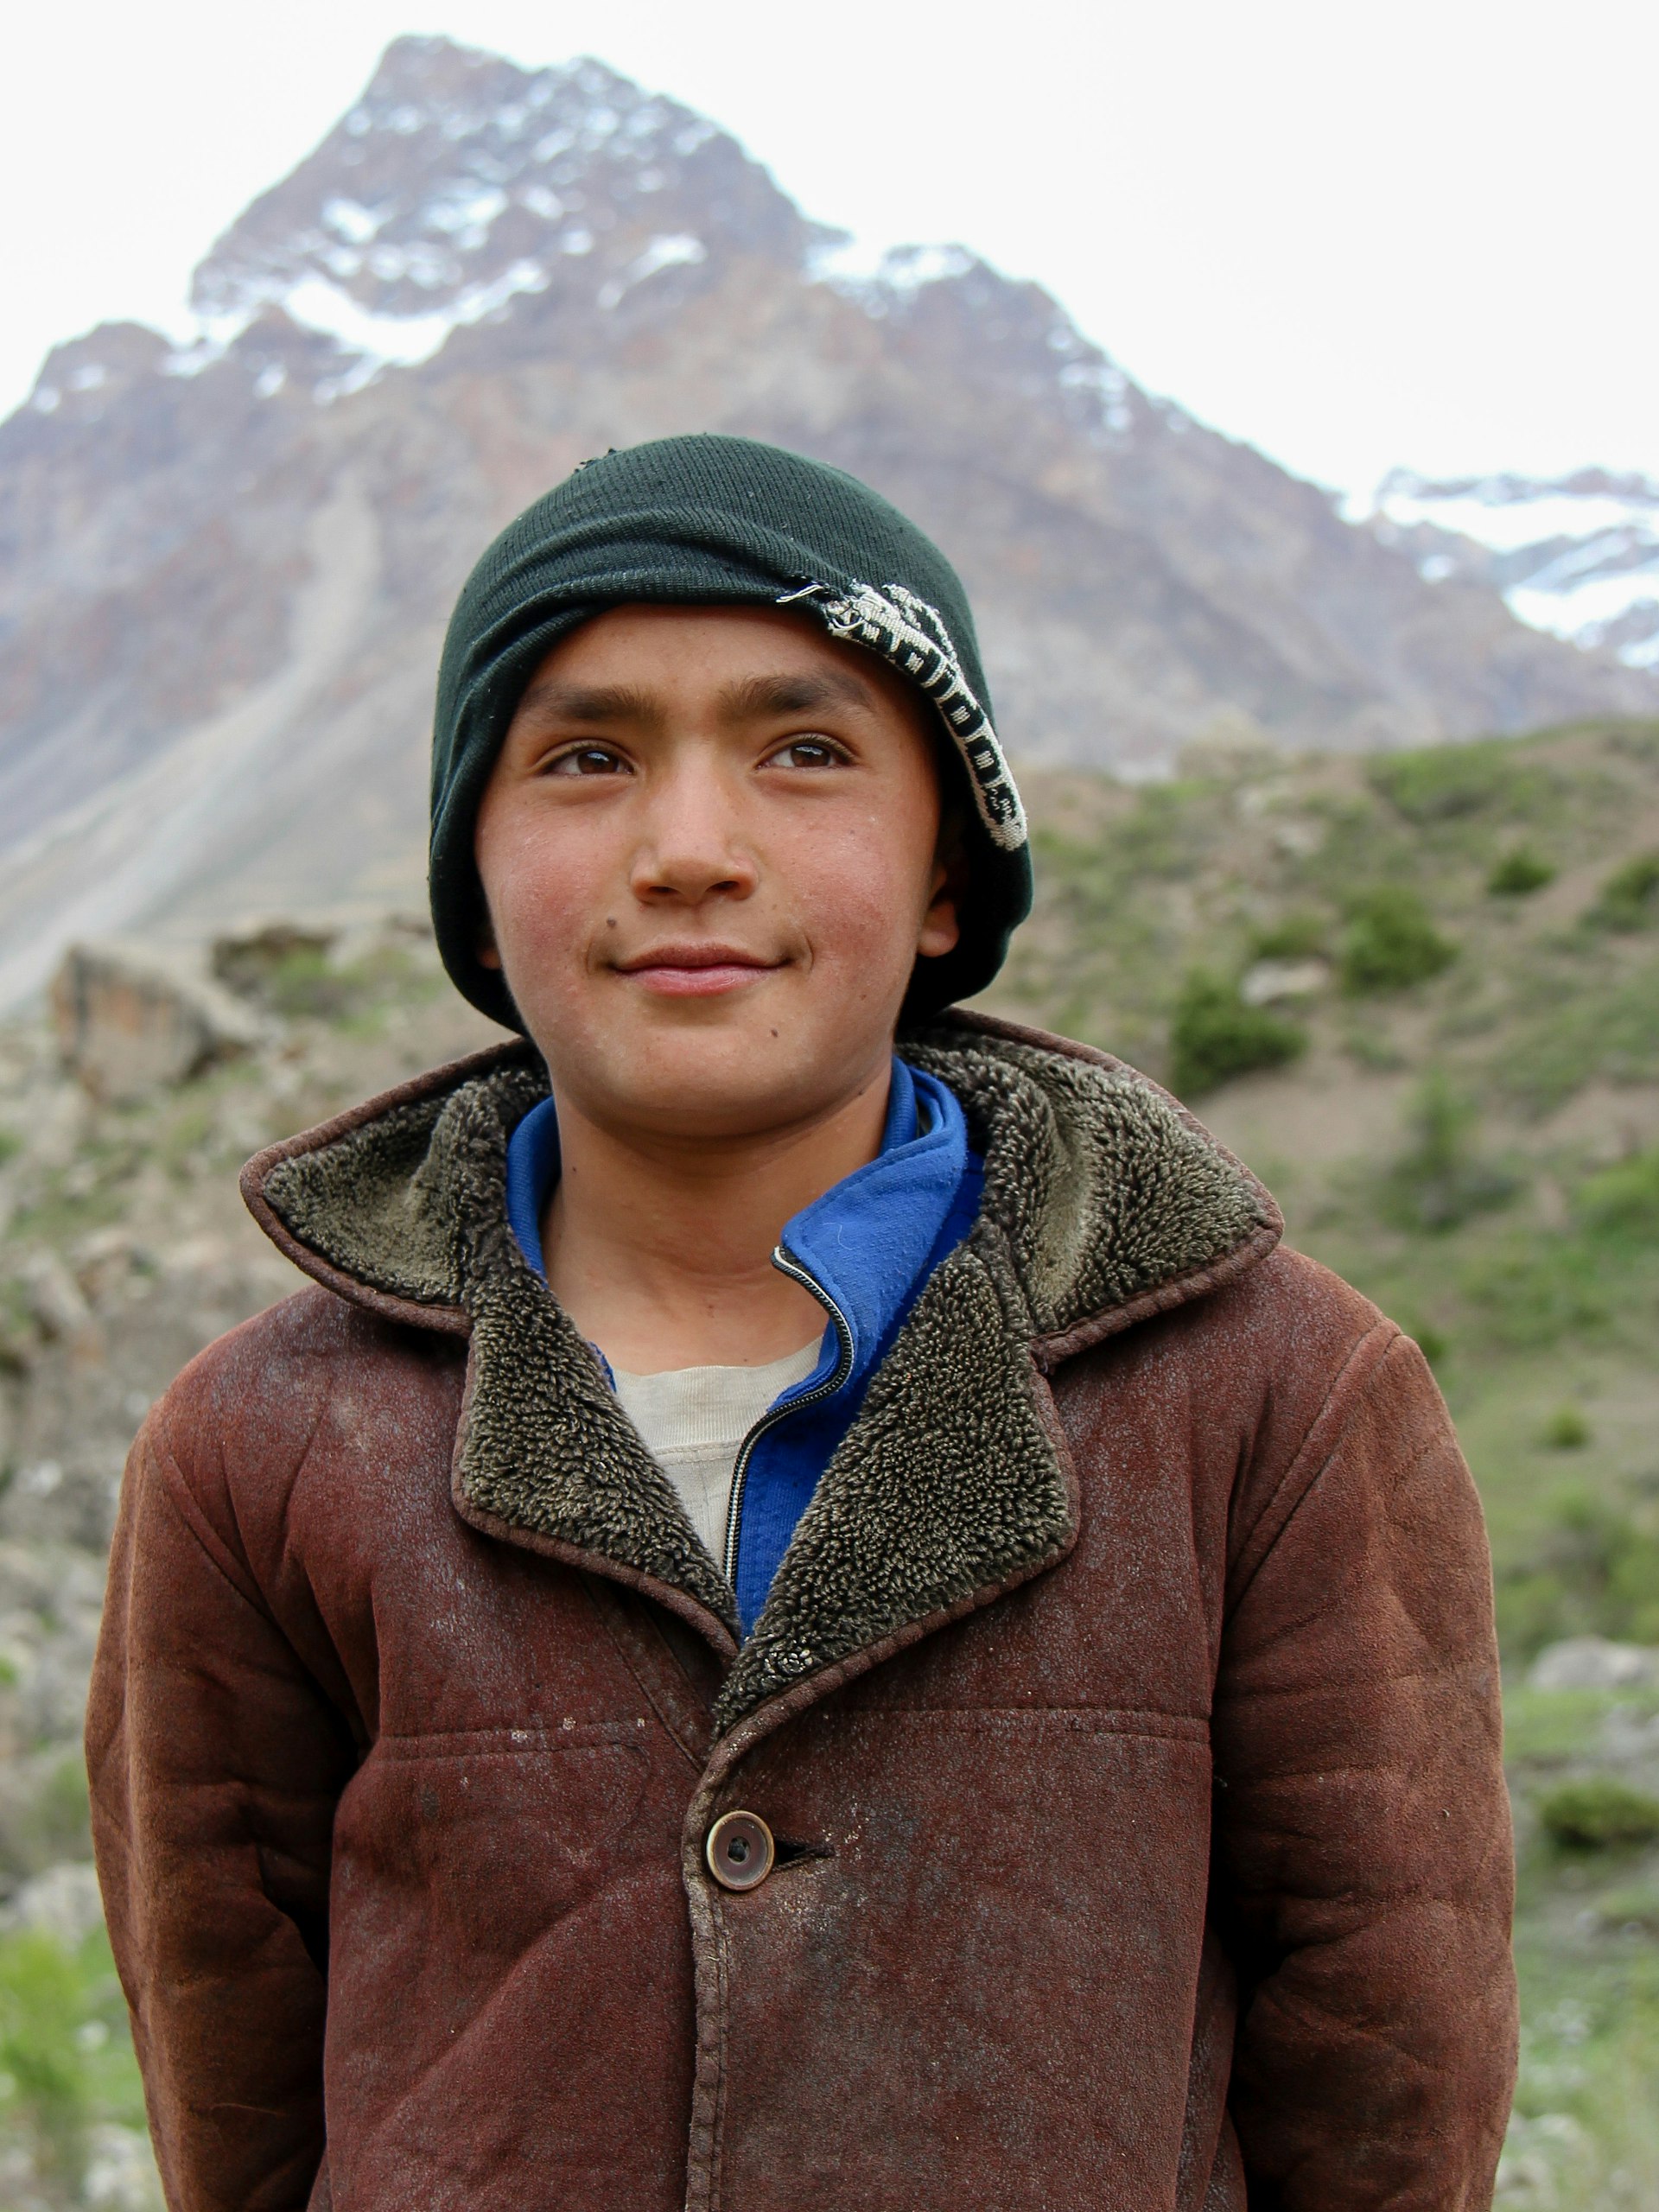 A young Tajik man dressed in a brown suede coat and green head scarf stands in front of a snowy mountain peak © Stephen Lioy / Lonely Planet